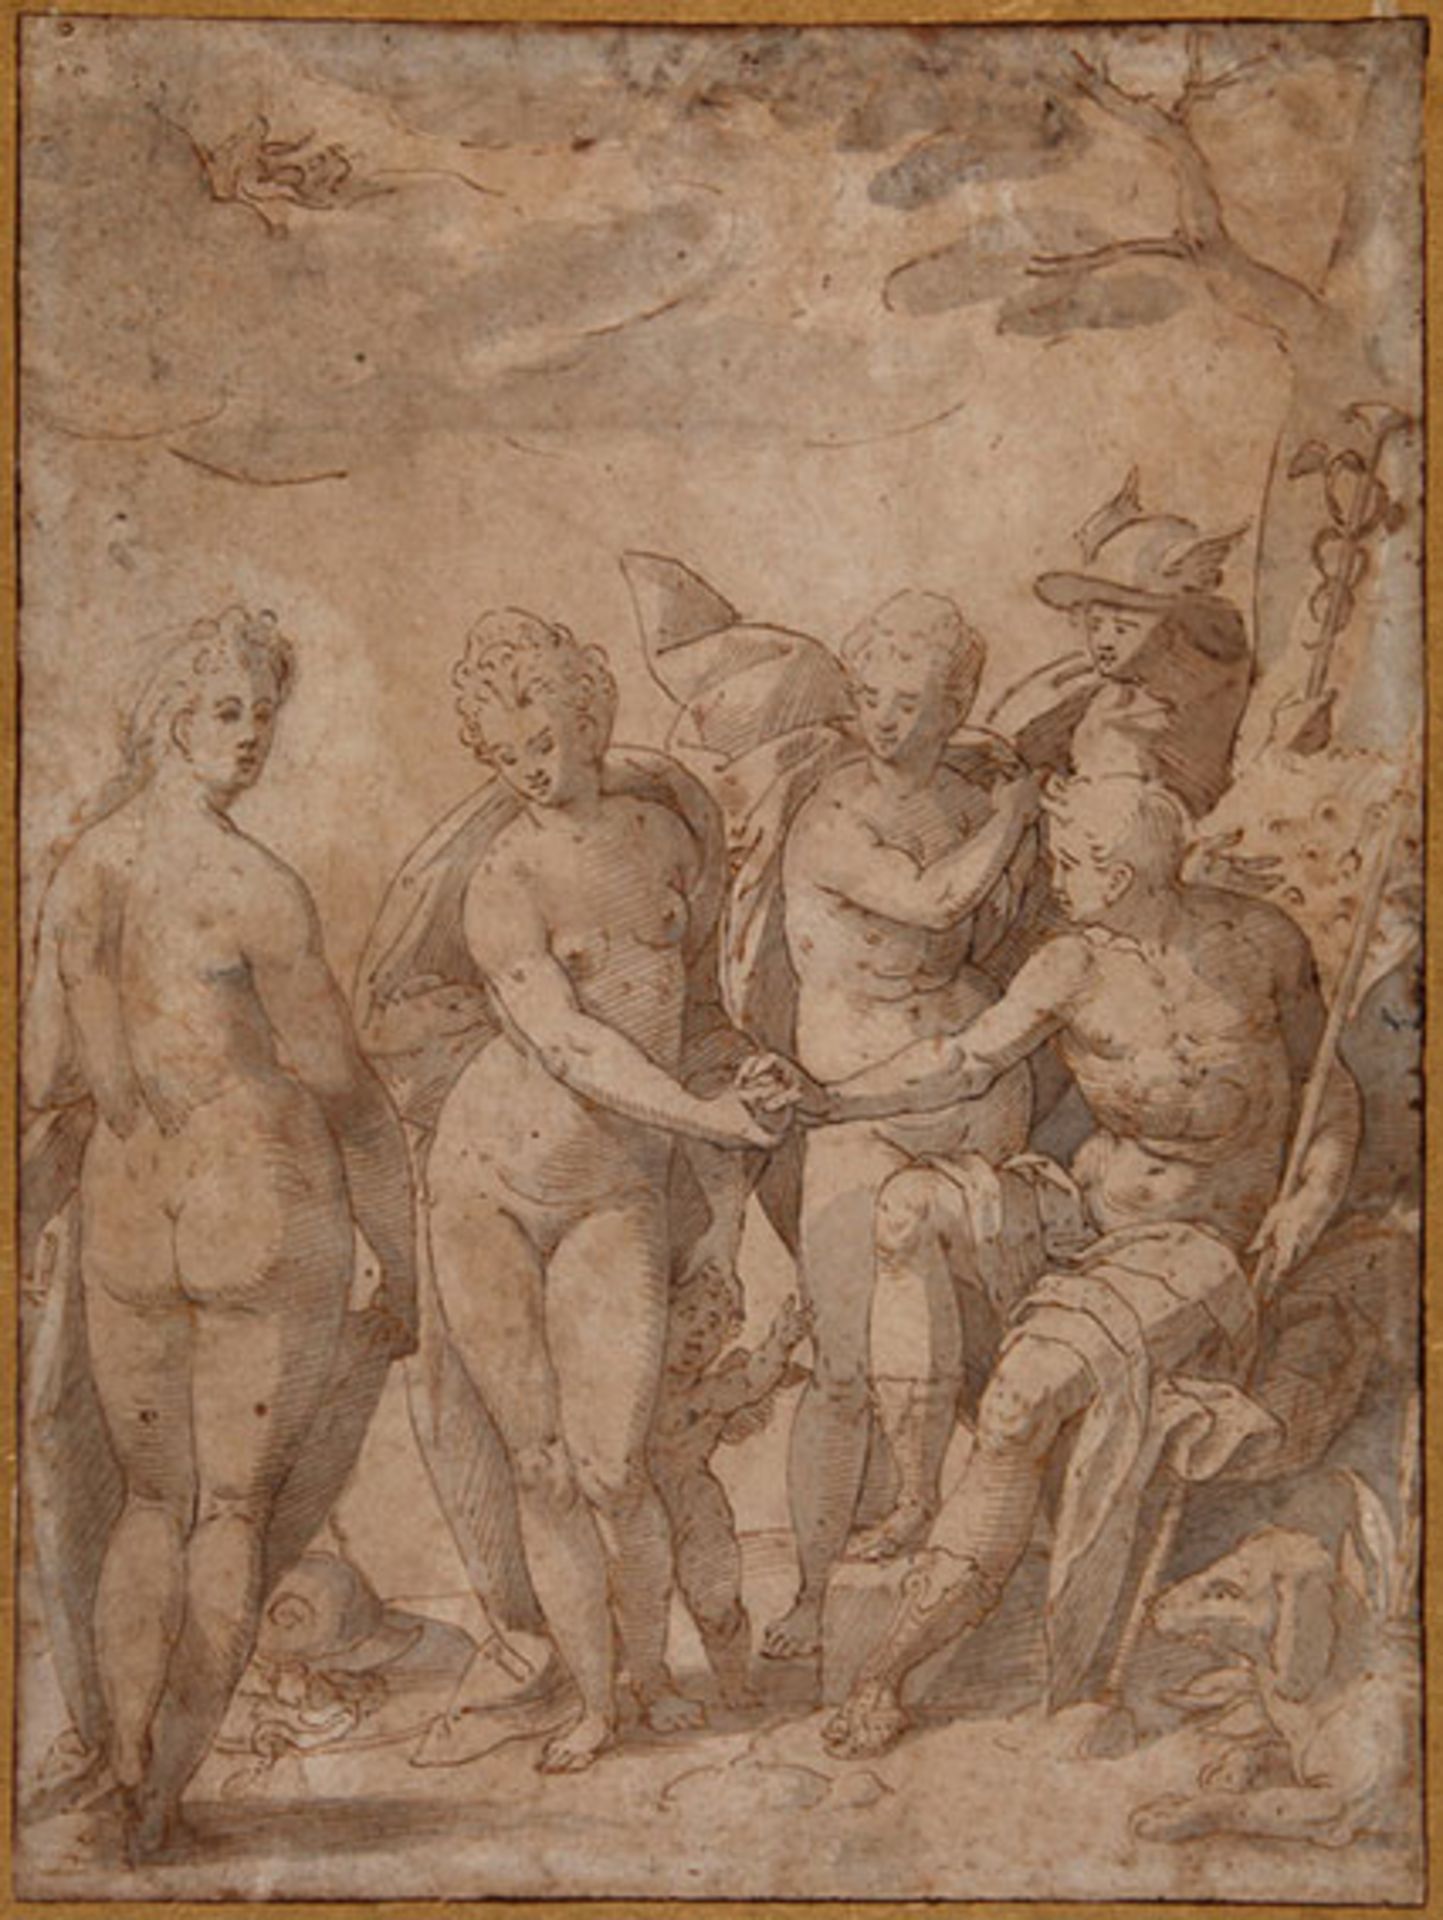 FLEMISH SCHOOL, 16th c. -- (The Judgment of Paris). Drawing in brown ink and grey wash. 364 x 272